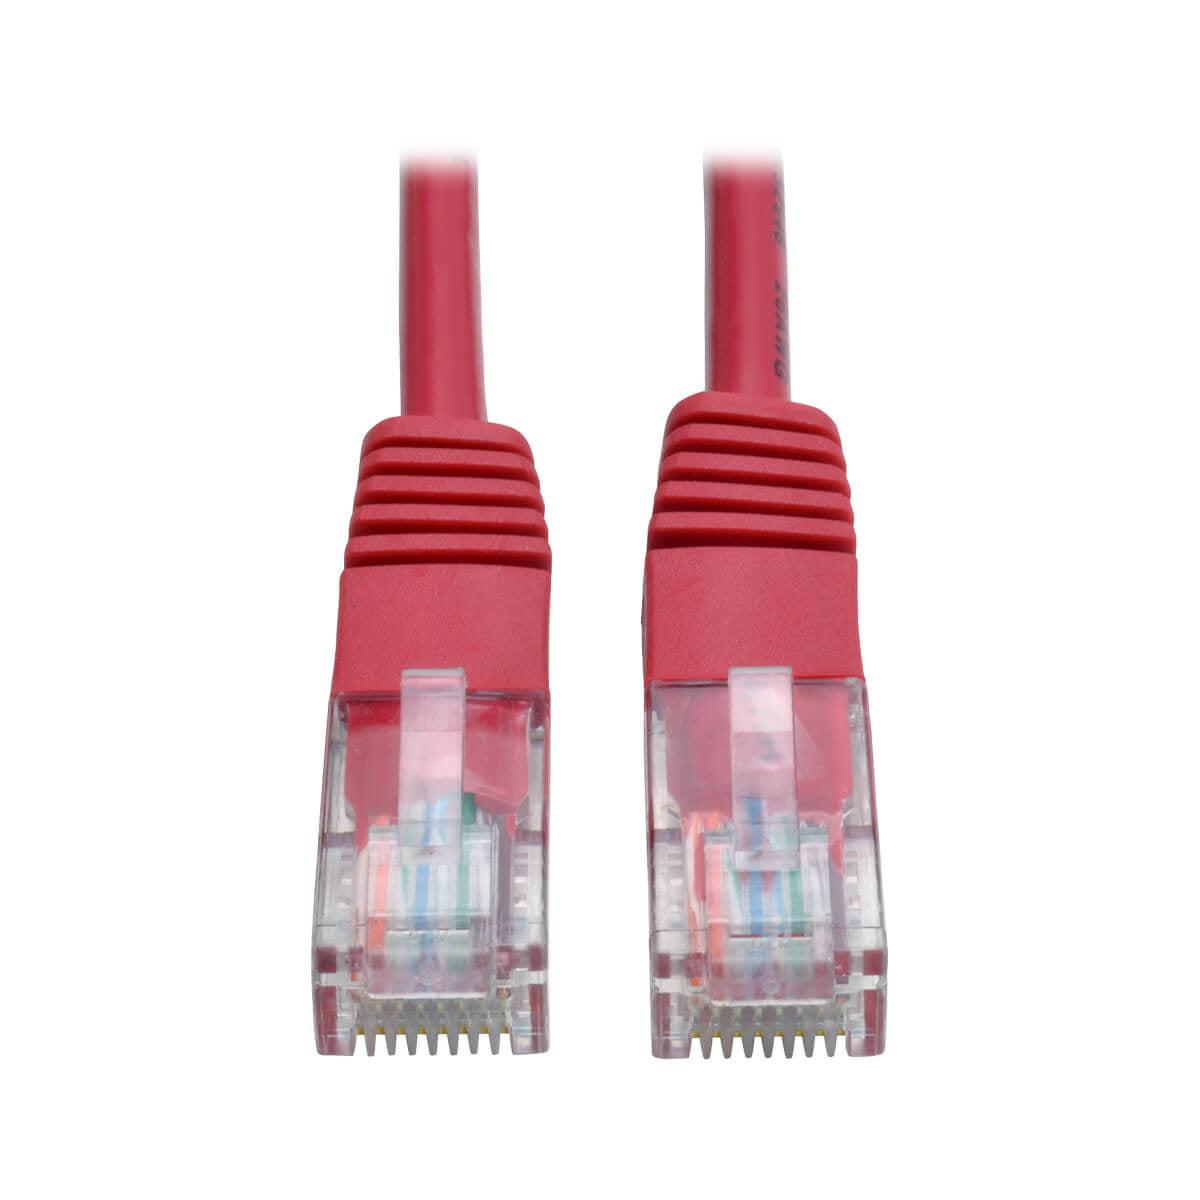 Tripp Lite N002-014-Rd Cat5E 350 Mhz Molded (Utp) Ethernet Cable (Rj45 M/M) - Red, 14 Ft. (4.27 M)